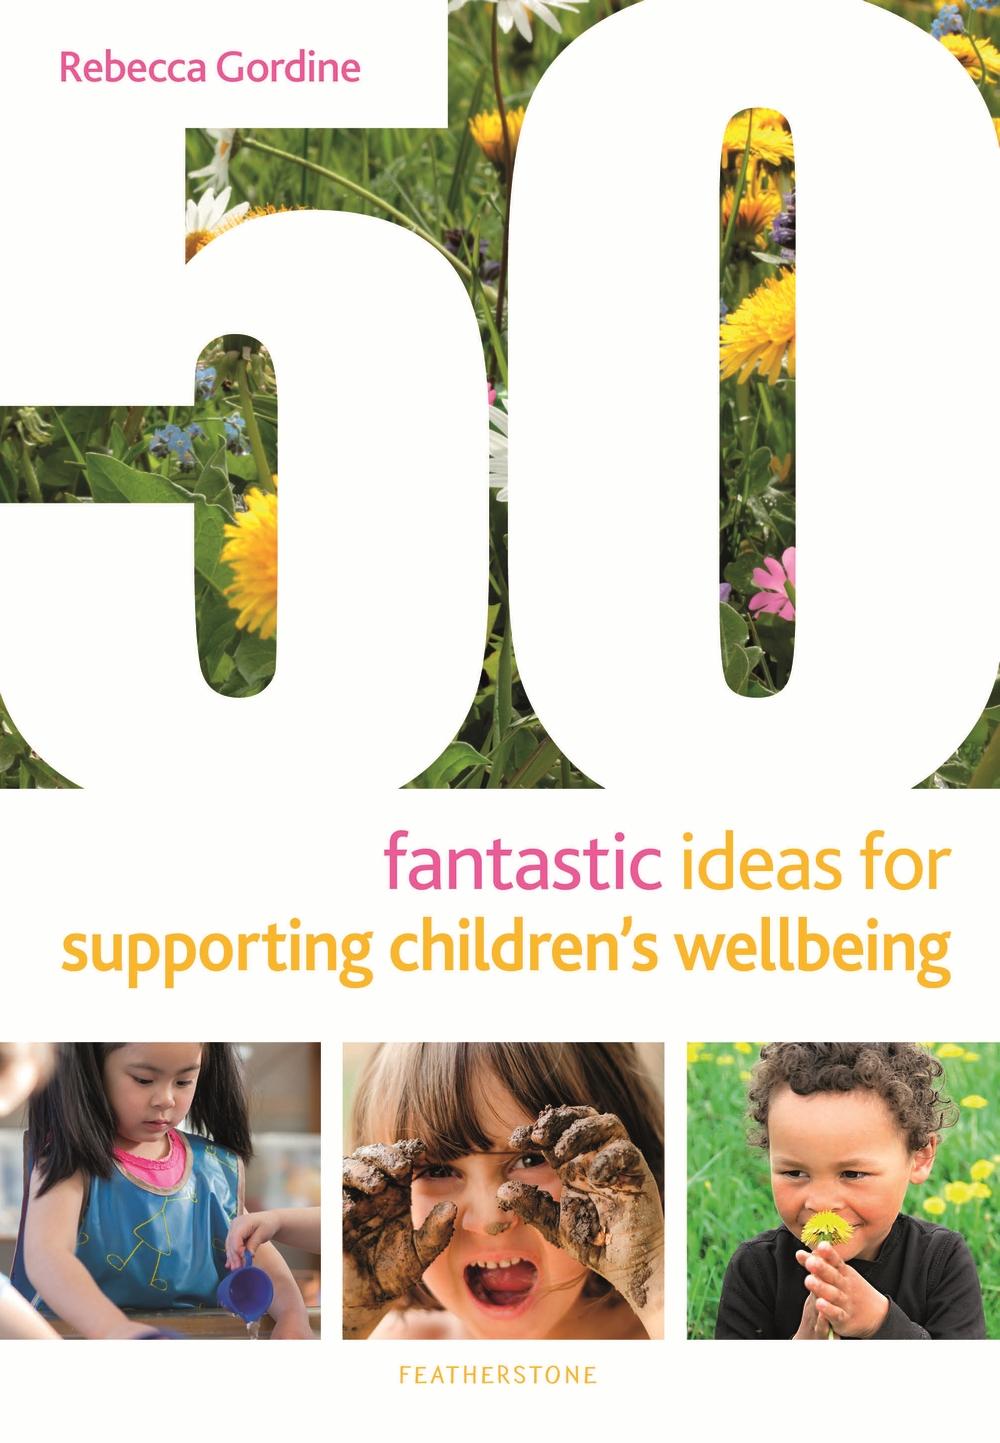 50 Fantastic Ideas for Supporting Children's Wellbeing - Rebecca Gordine